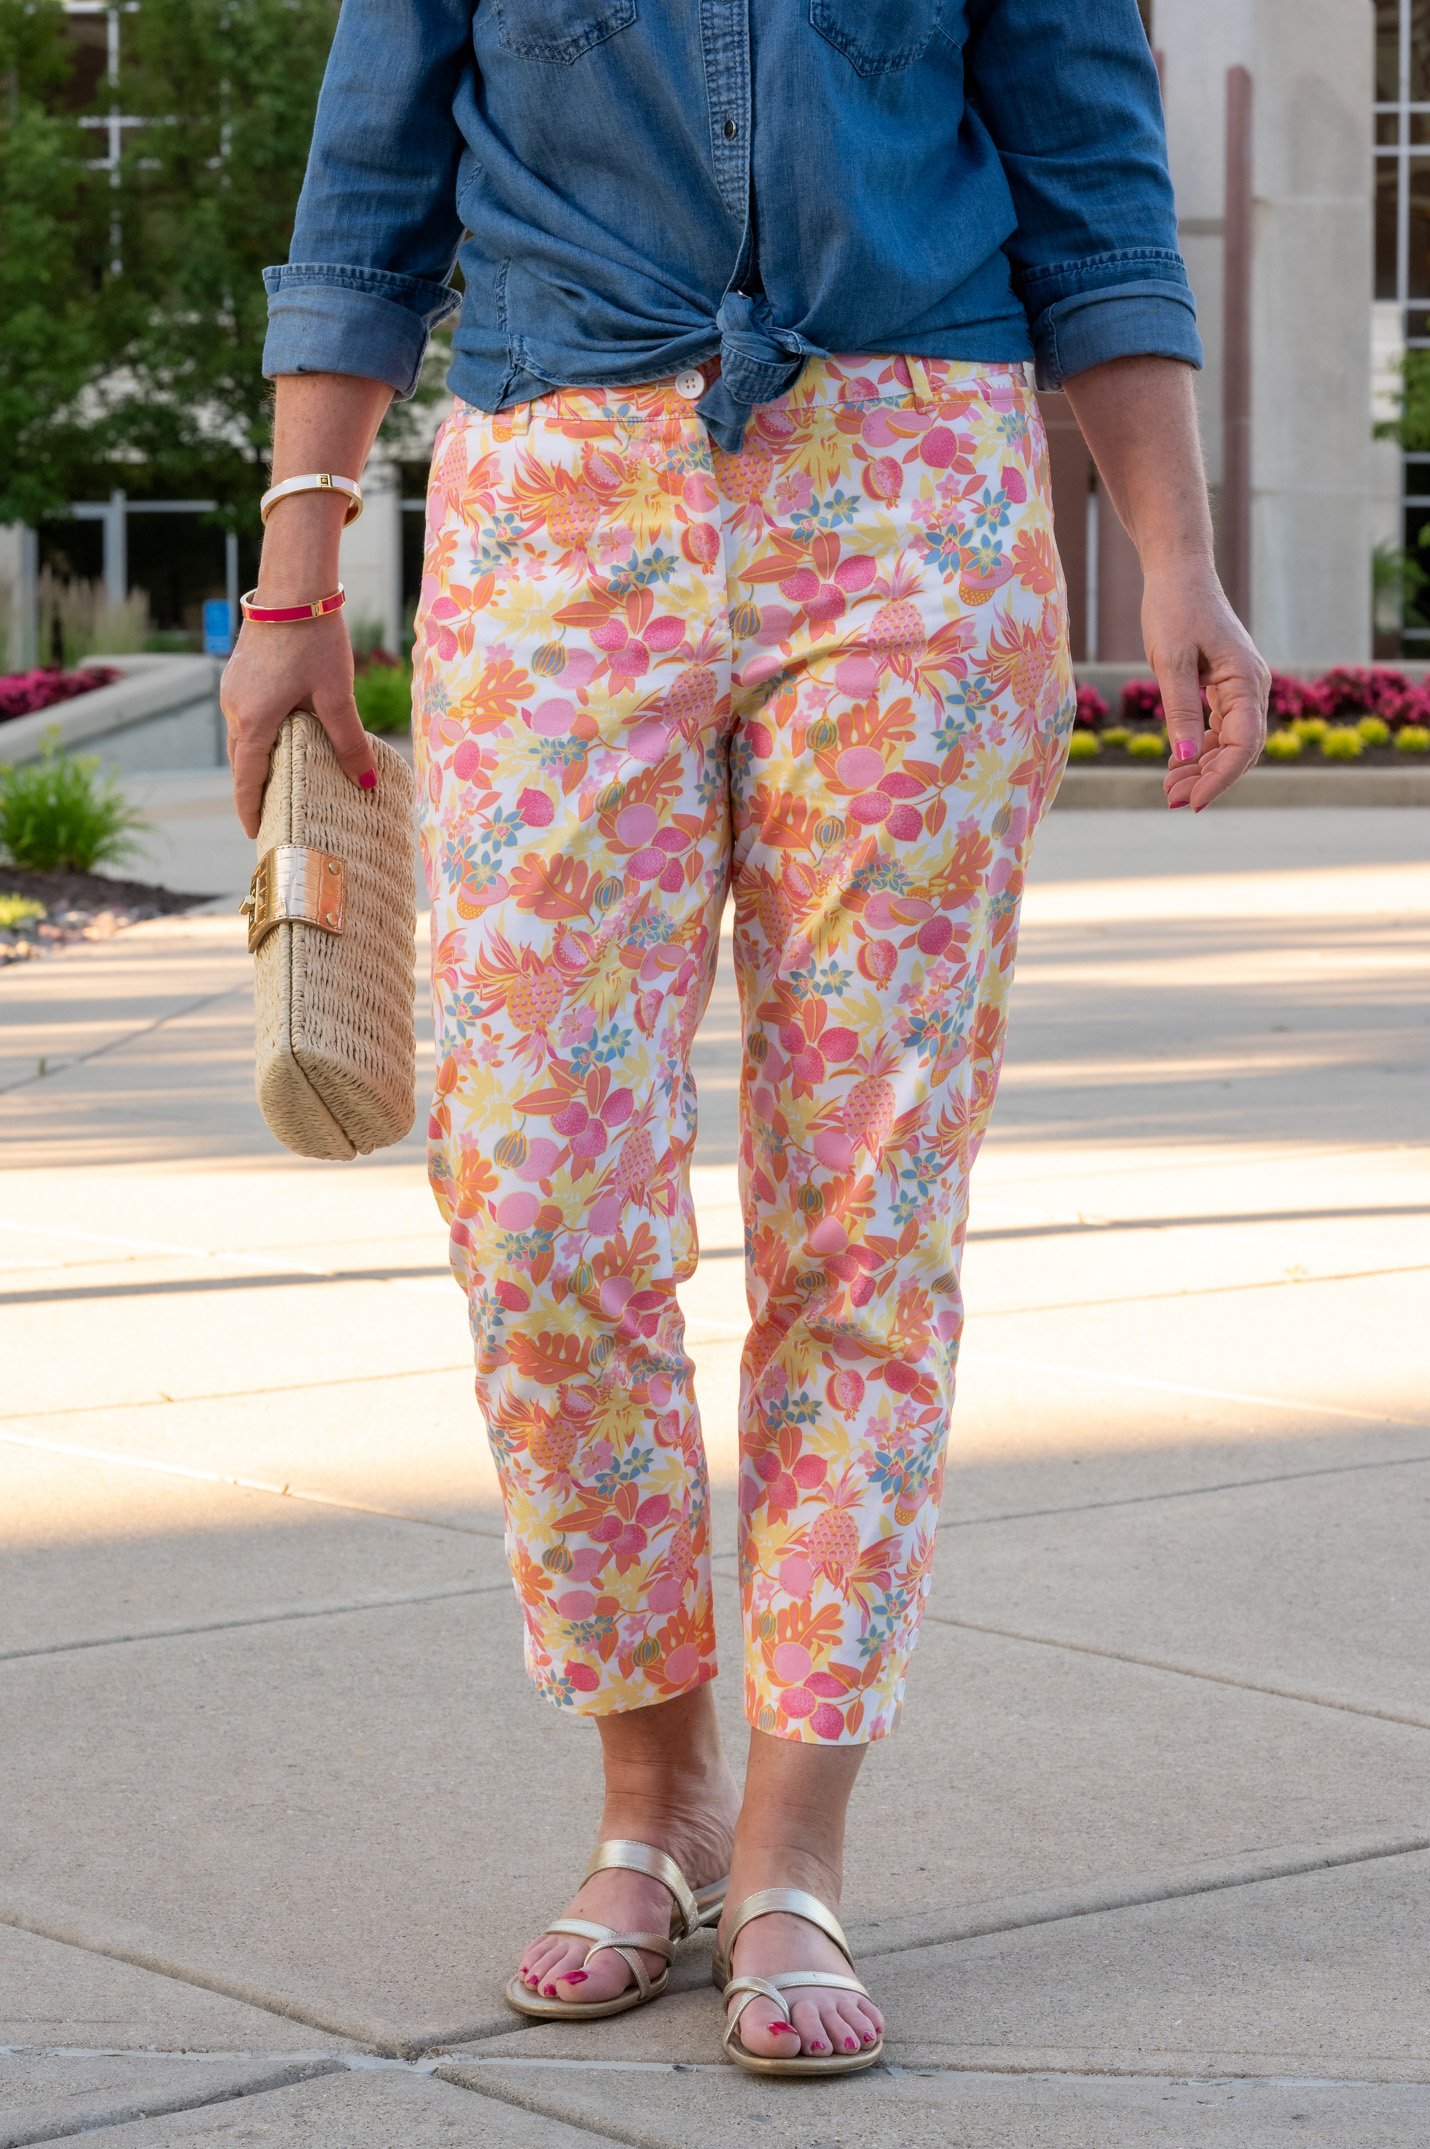 How To Wear Floral Pants - Flip And Style